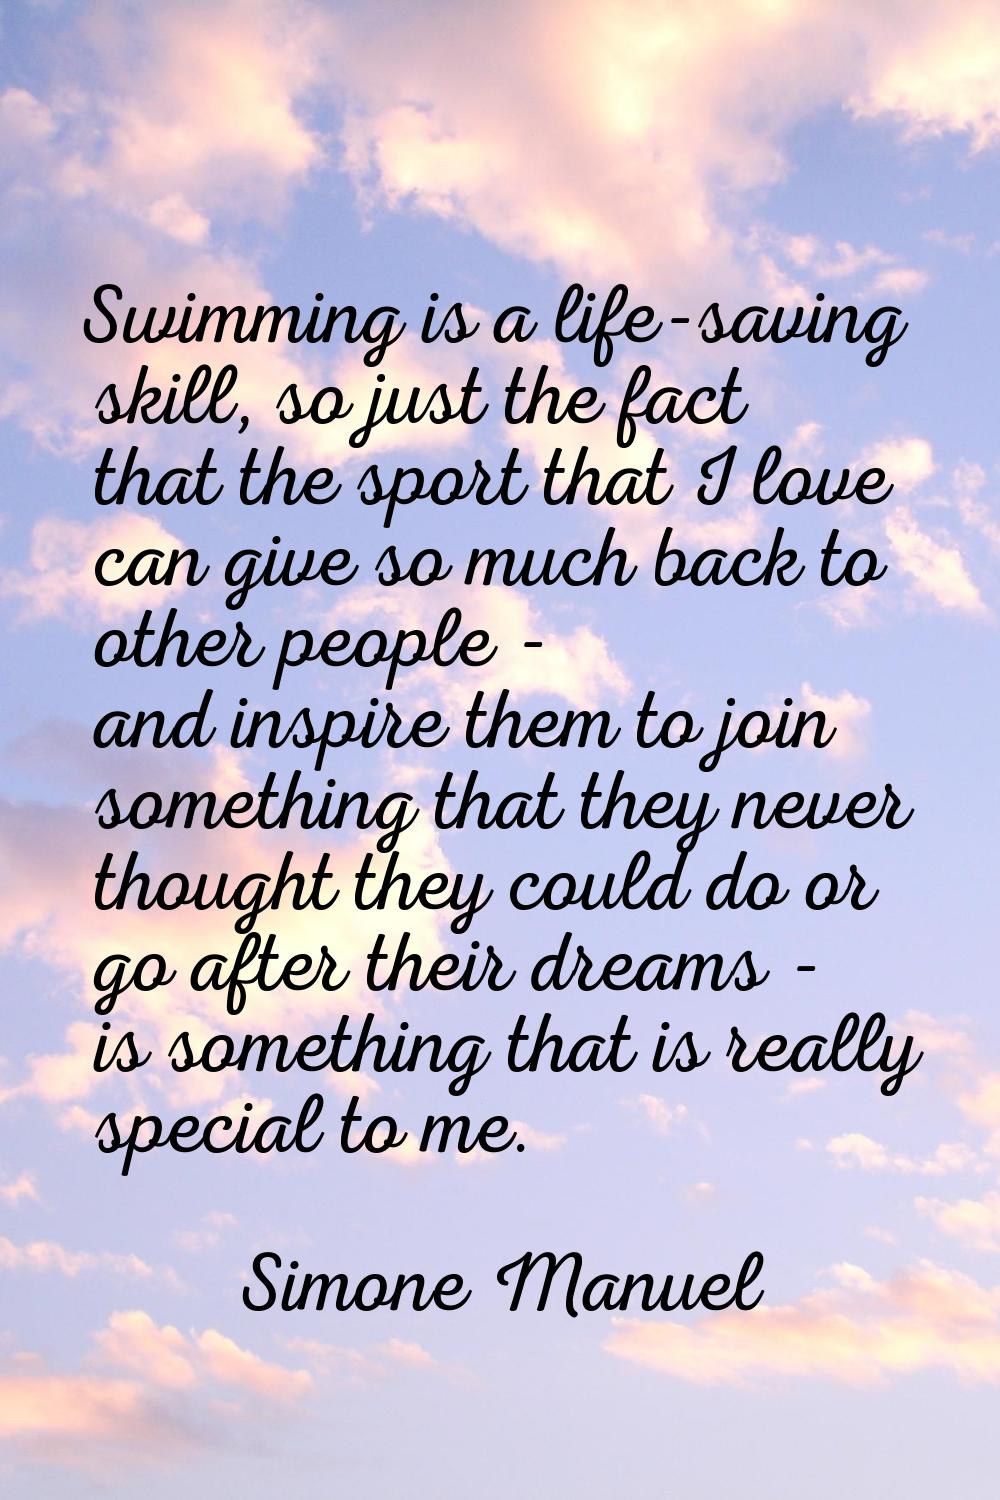 Swimming is a life-saving skill, so just the fact that the sport that I love can give so much back 